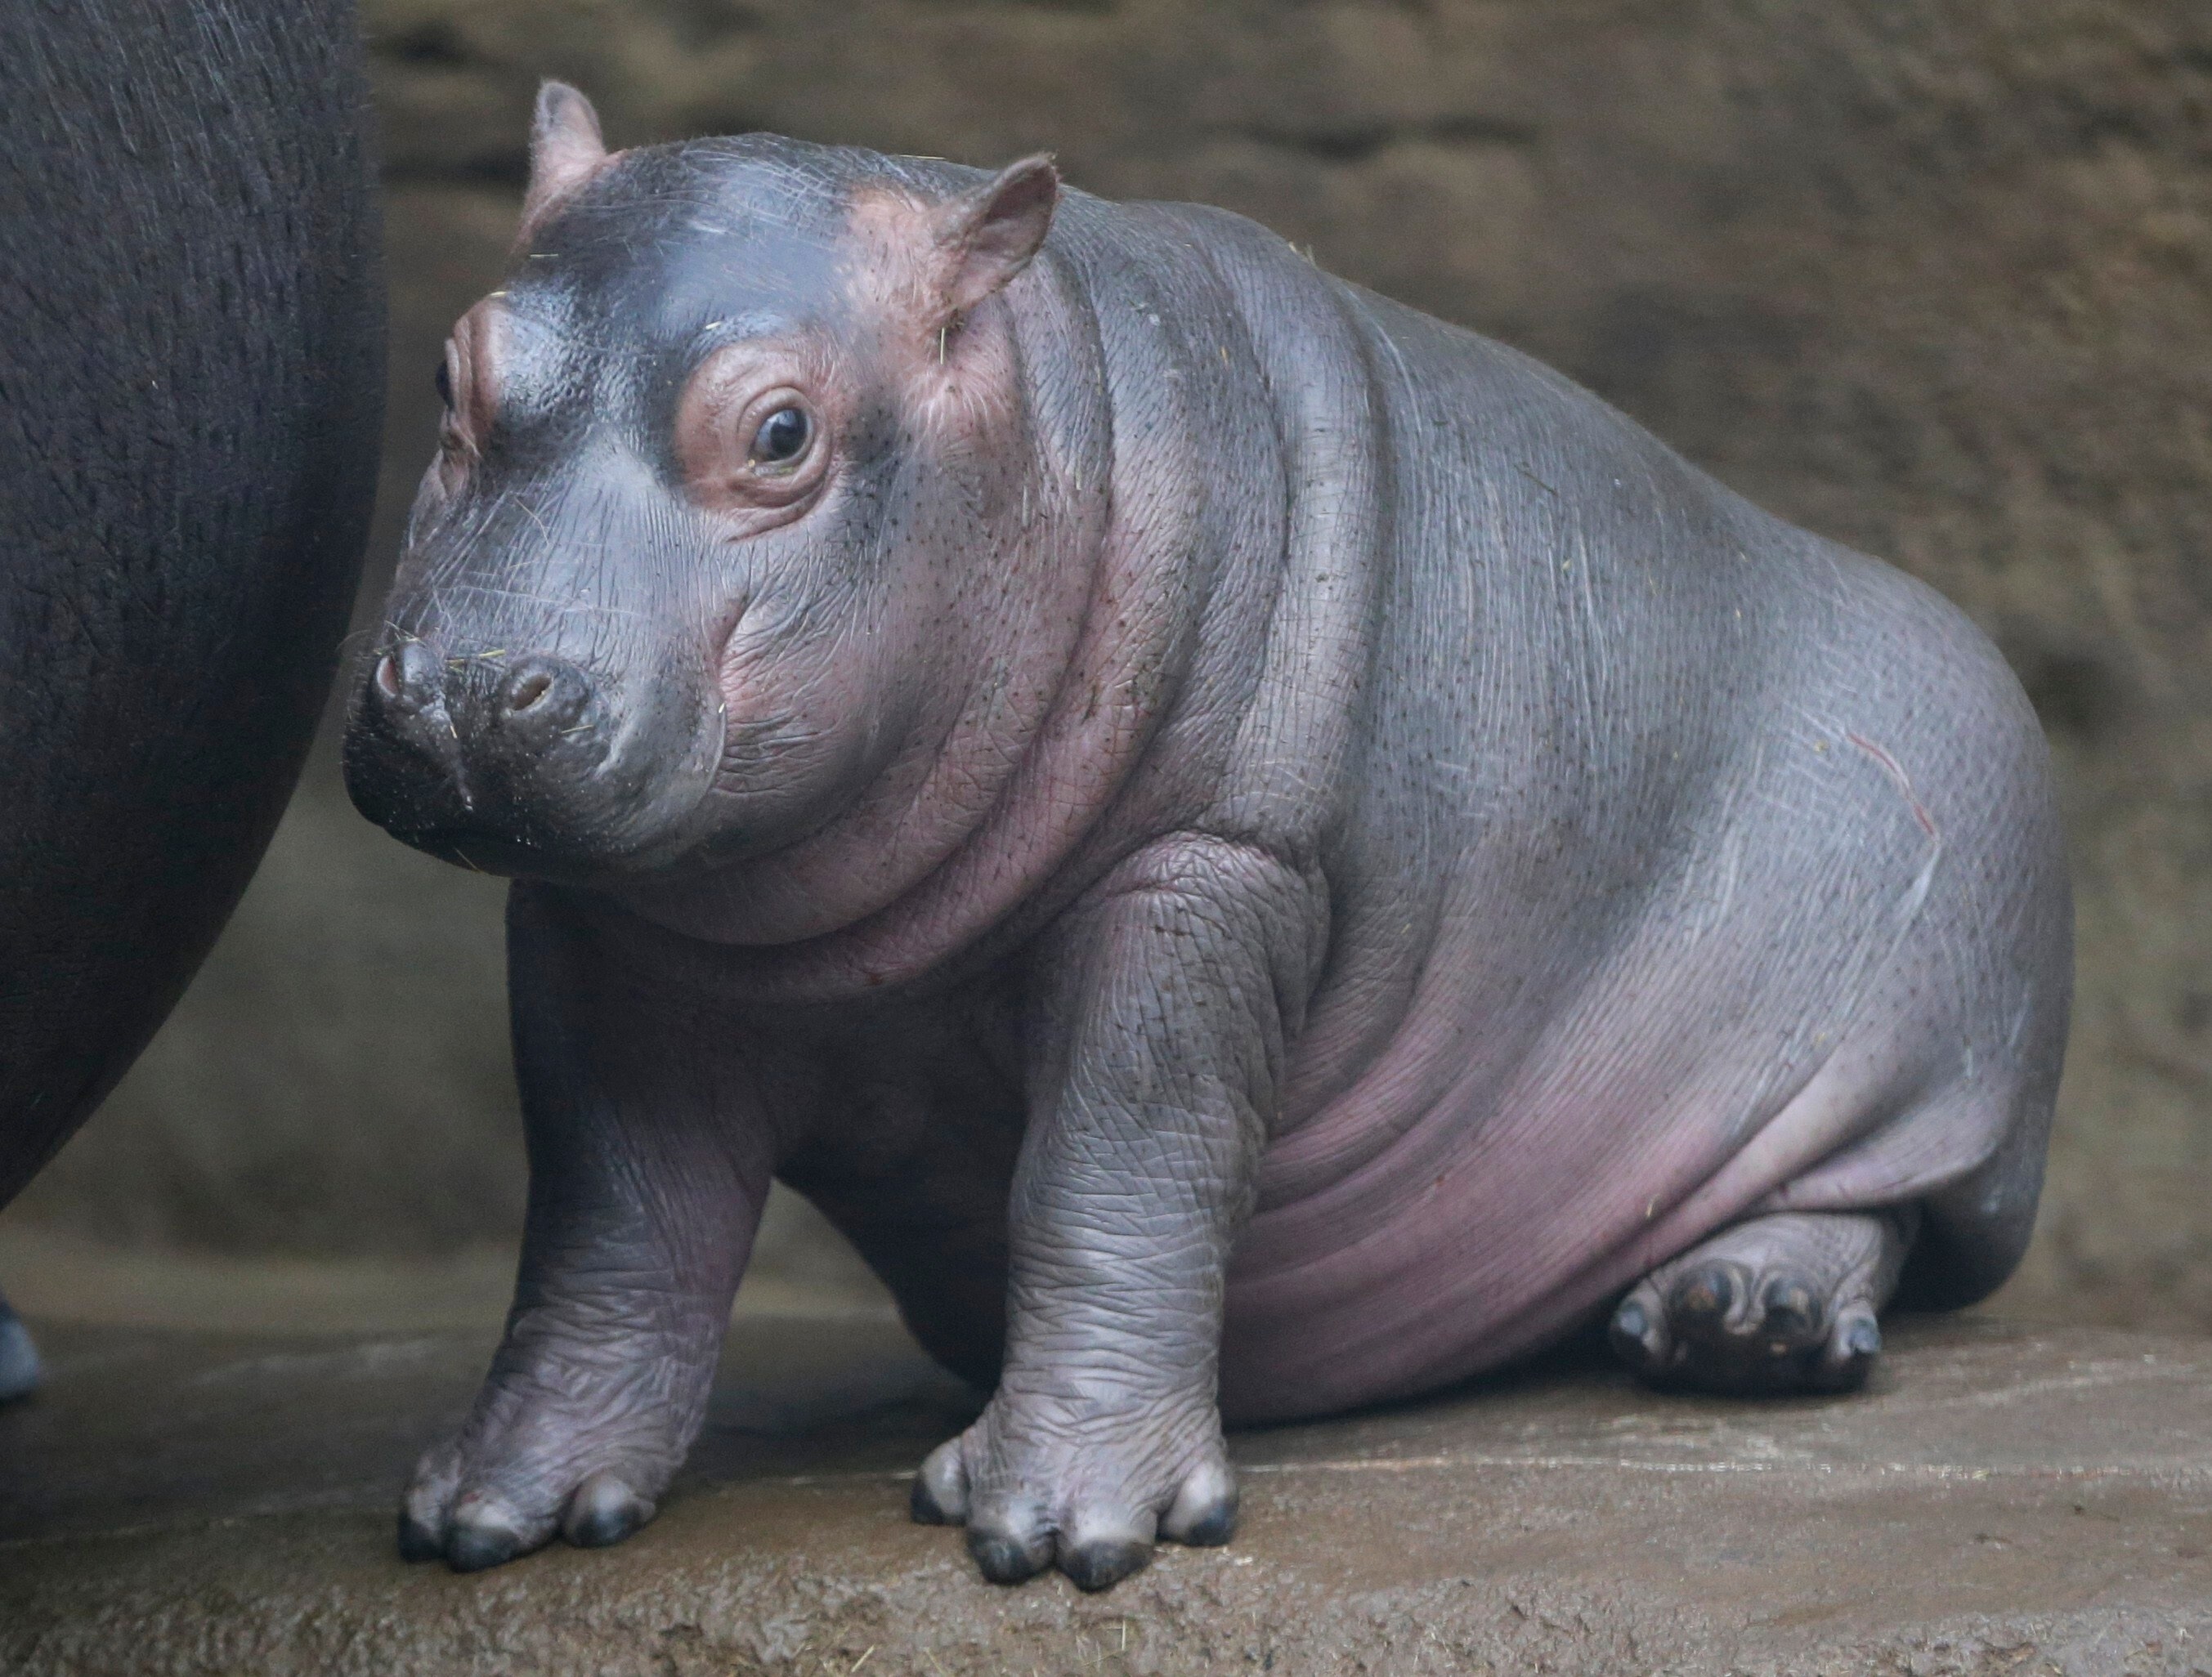 A cute little hippo with many skin folds